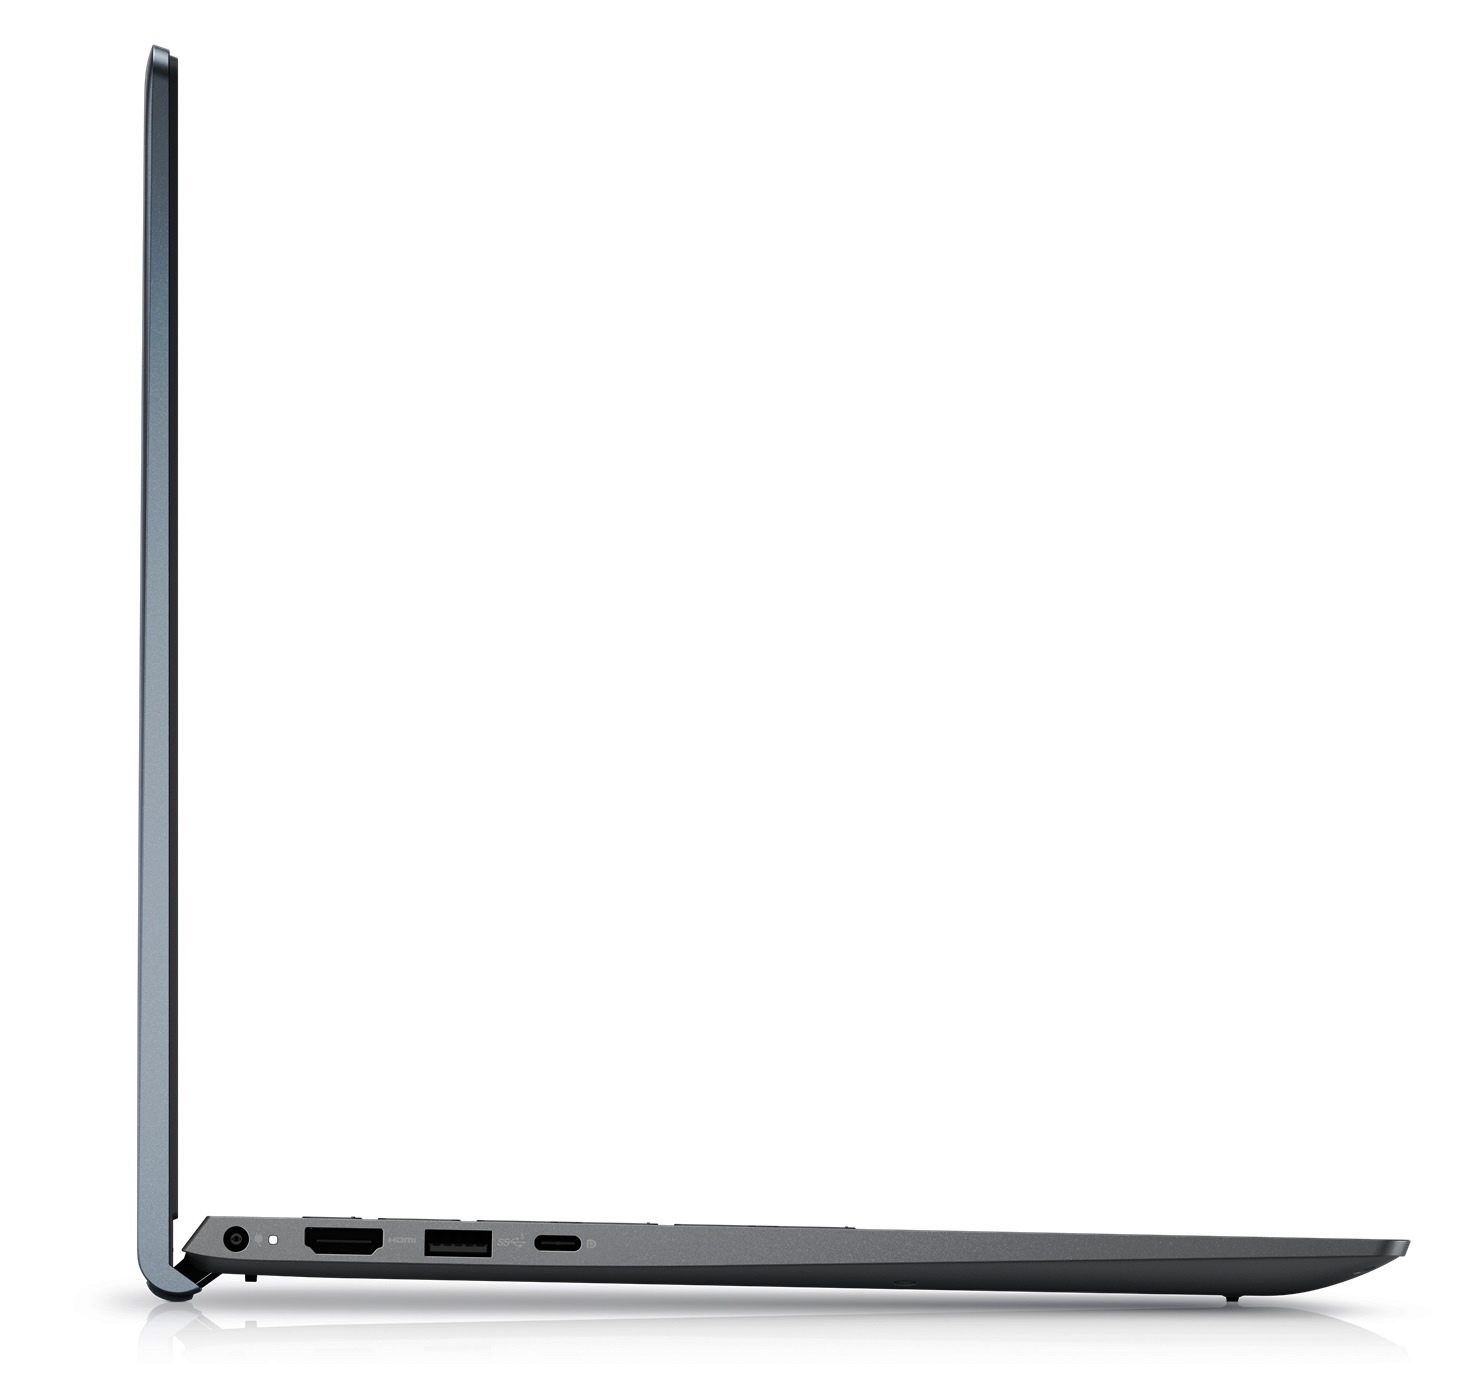 Dell Inspiron 15 5515 - Left View